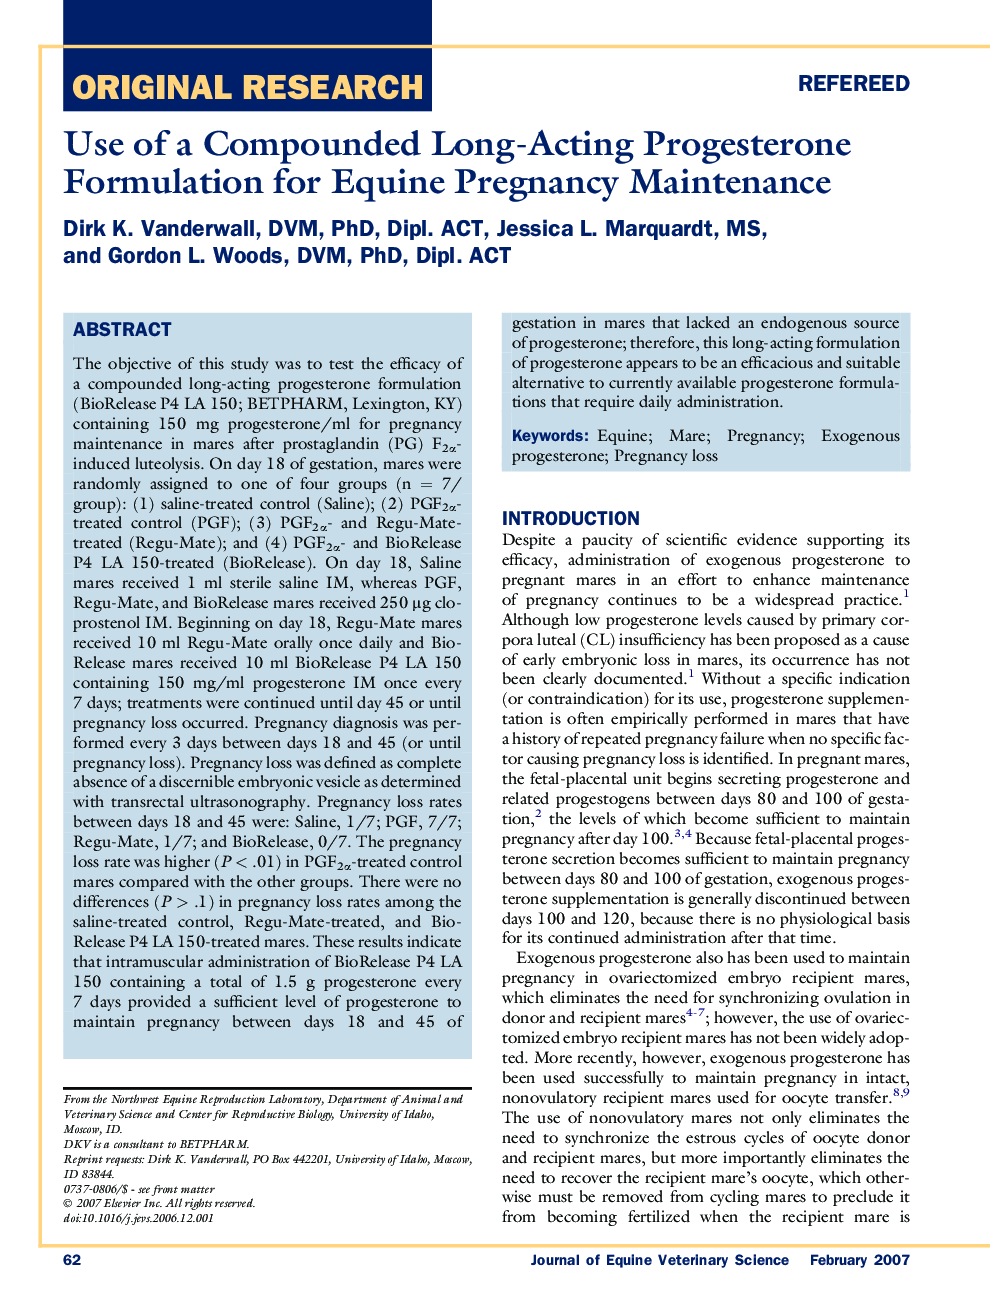 Use of a Compounded Long-Acting Progesterone Formulation for Equine Pregnancy Maintenance 